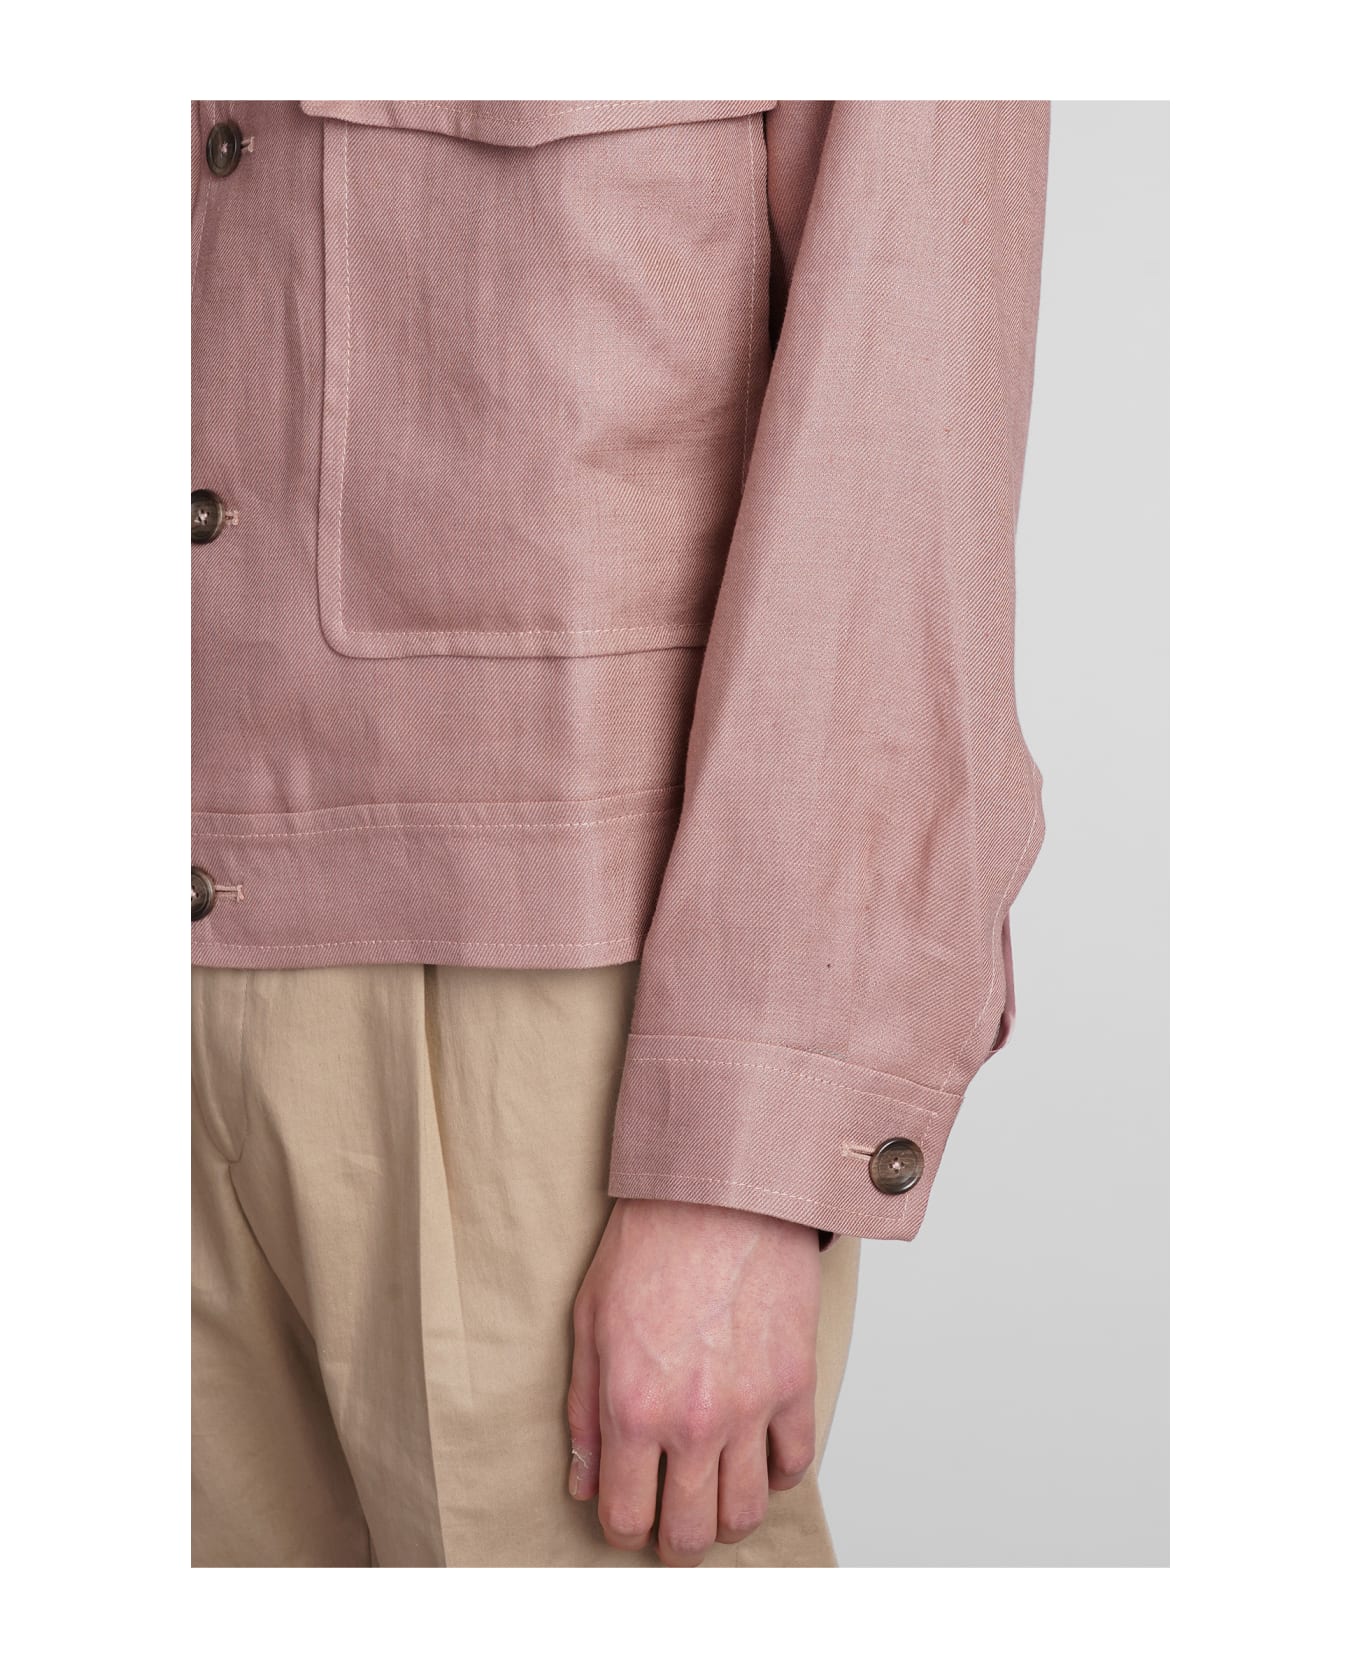 Tagliatore 0205 Amir Casual Jacket In Rose-pink Linen - rose-pink